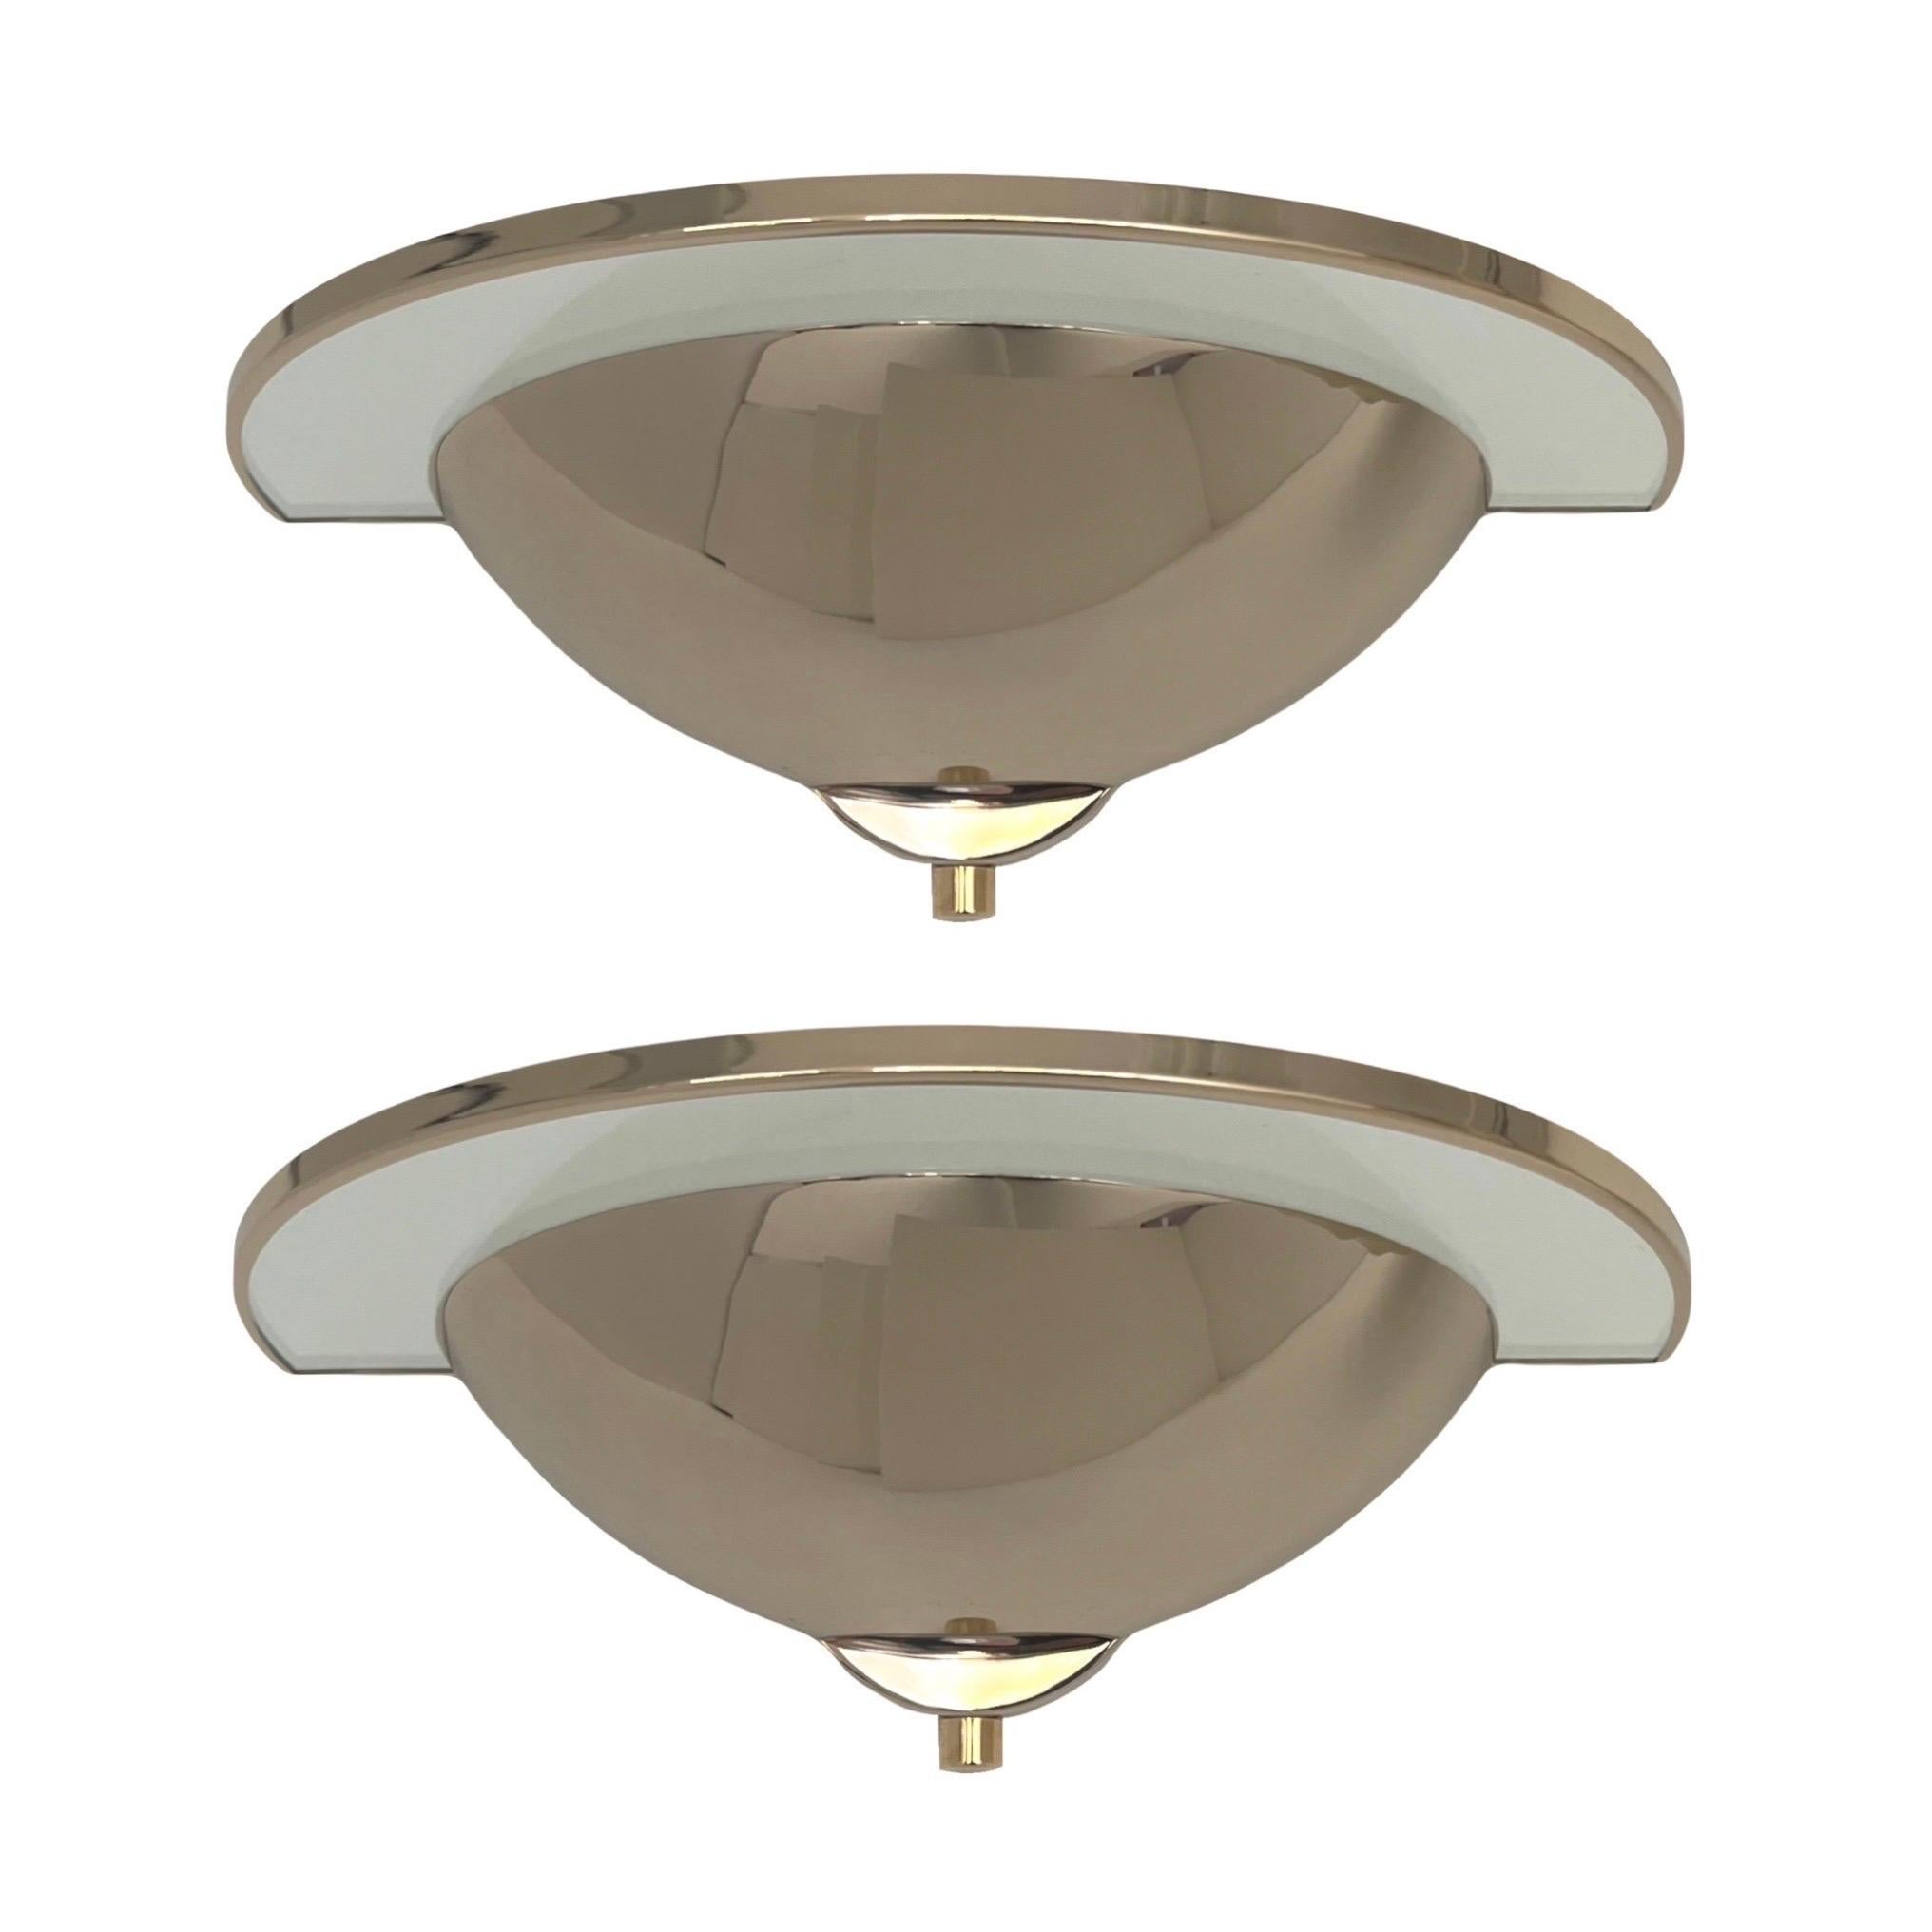 Postmodern Dimmable Gold Pair of Wall Sconces by Estiluz, Barcelona, 1980s For Sale 6